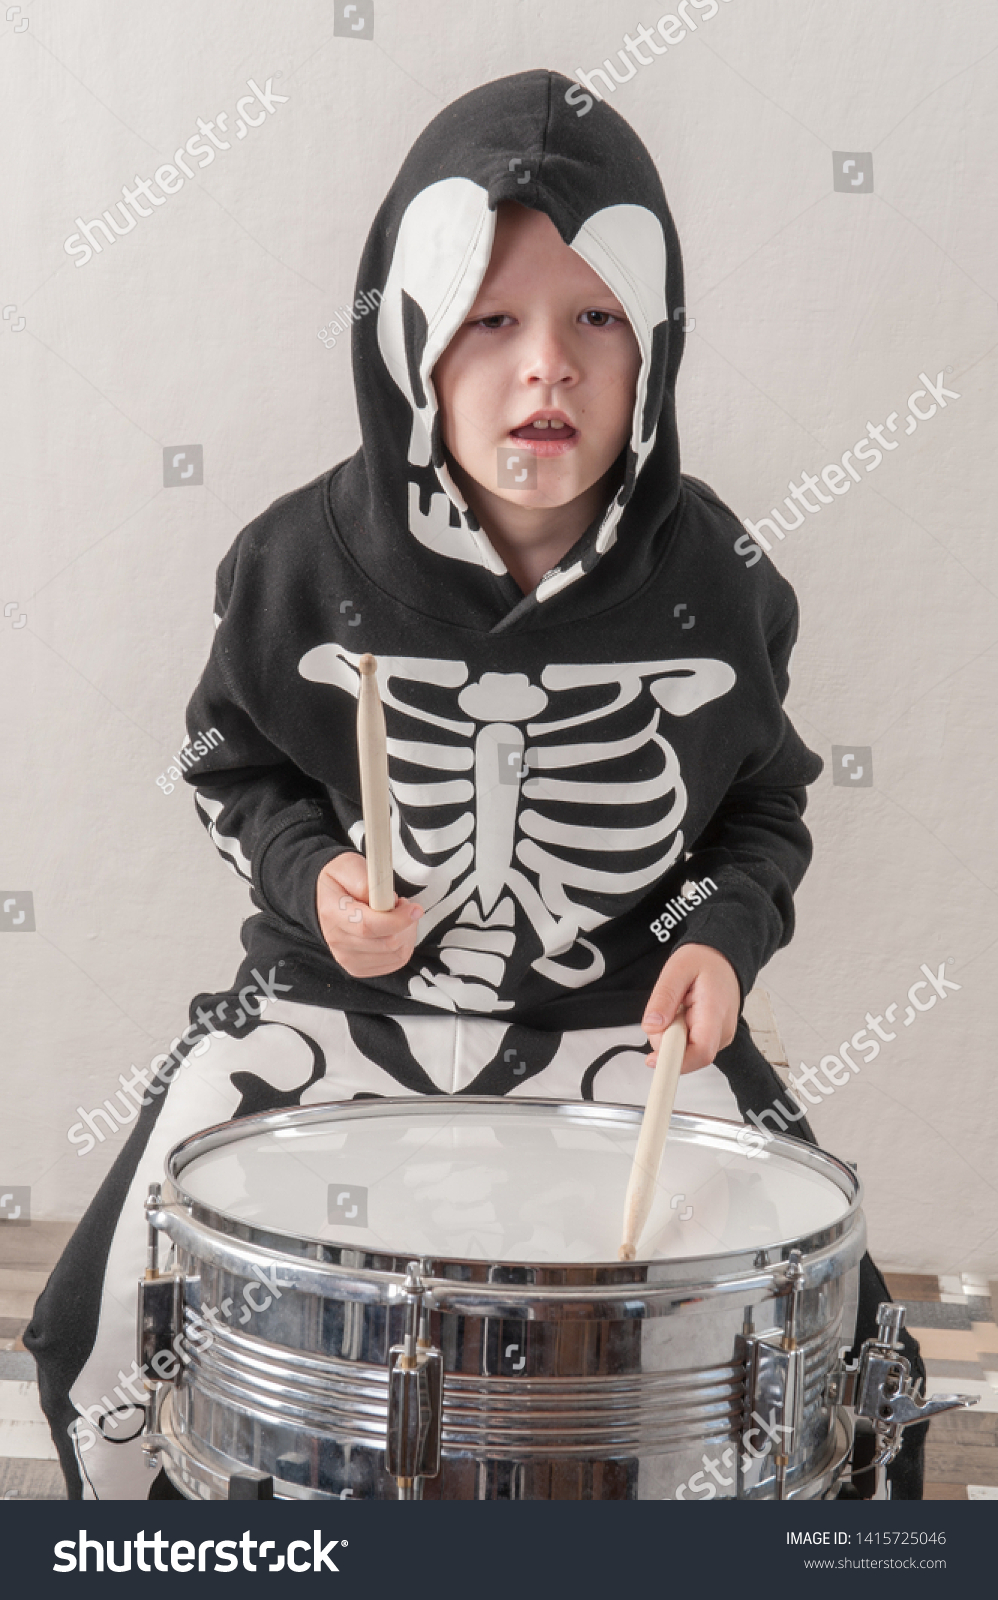 Happy friendly family of musicians in carnival costumes, boys and young mother play drum and try to sing with microphone. Black suit with image of skeletons. Classic halloween costume. Funny children #1415725046